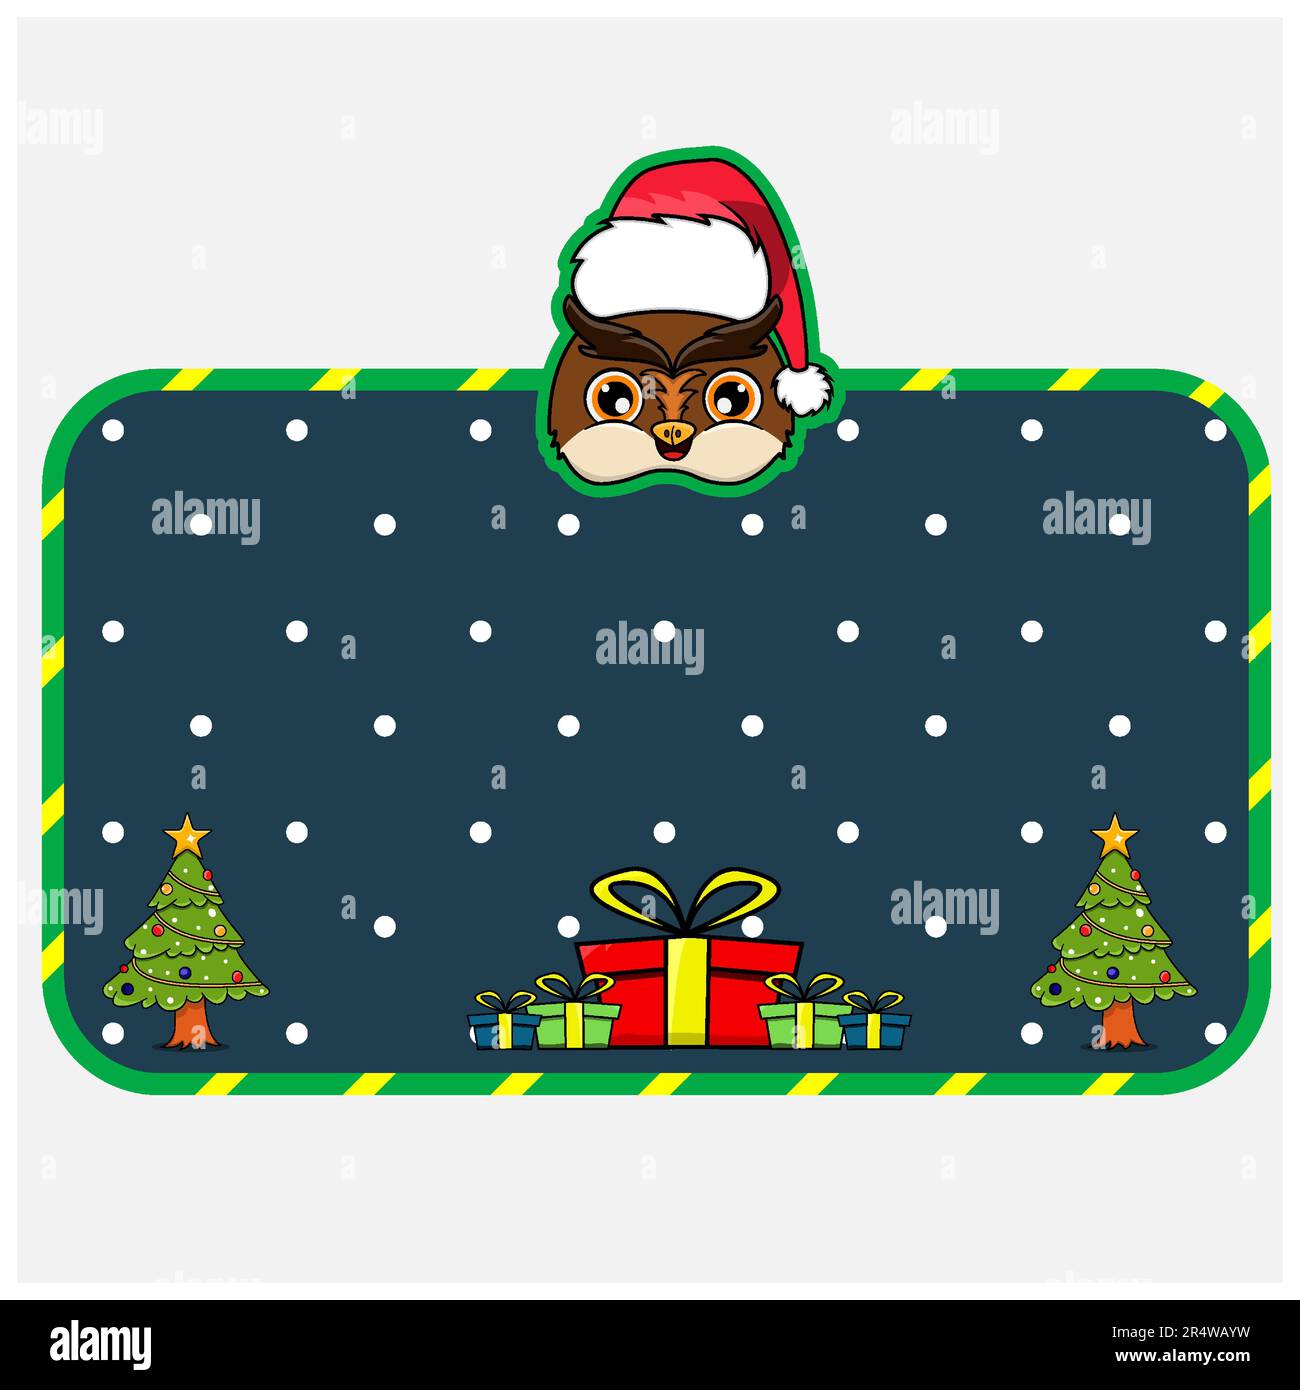 Christmas and New Year Greeting Card With Owl Character Design. Head Animal Wearing Christmas Hat. Vector And Illustration. Stock Vector